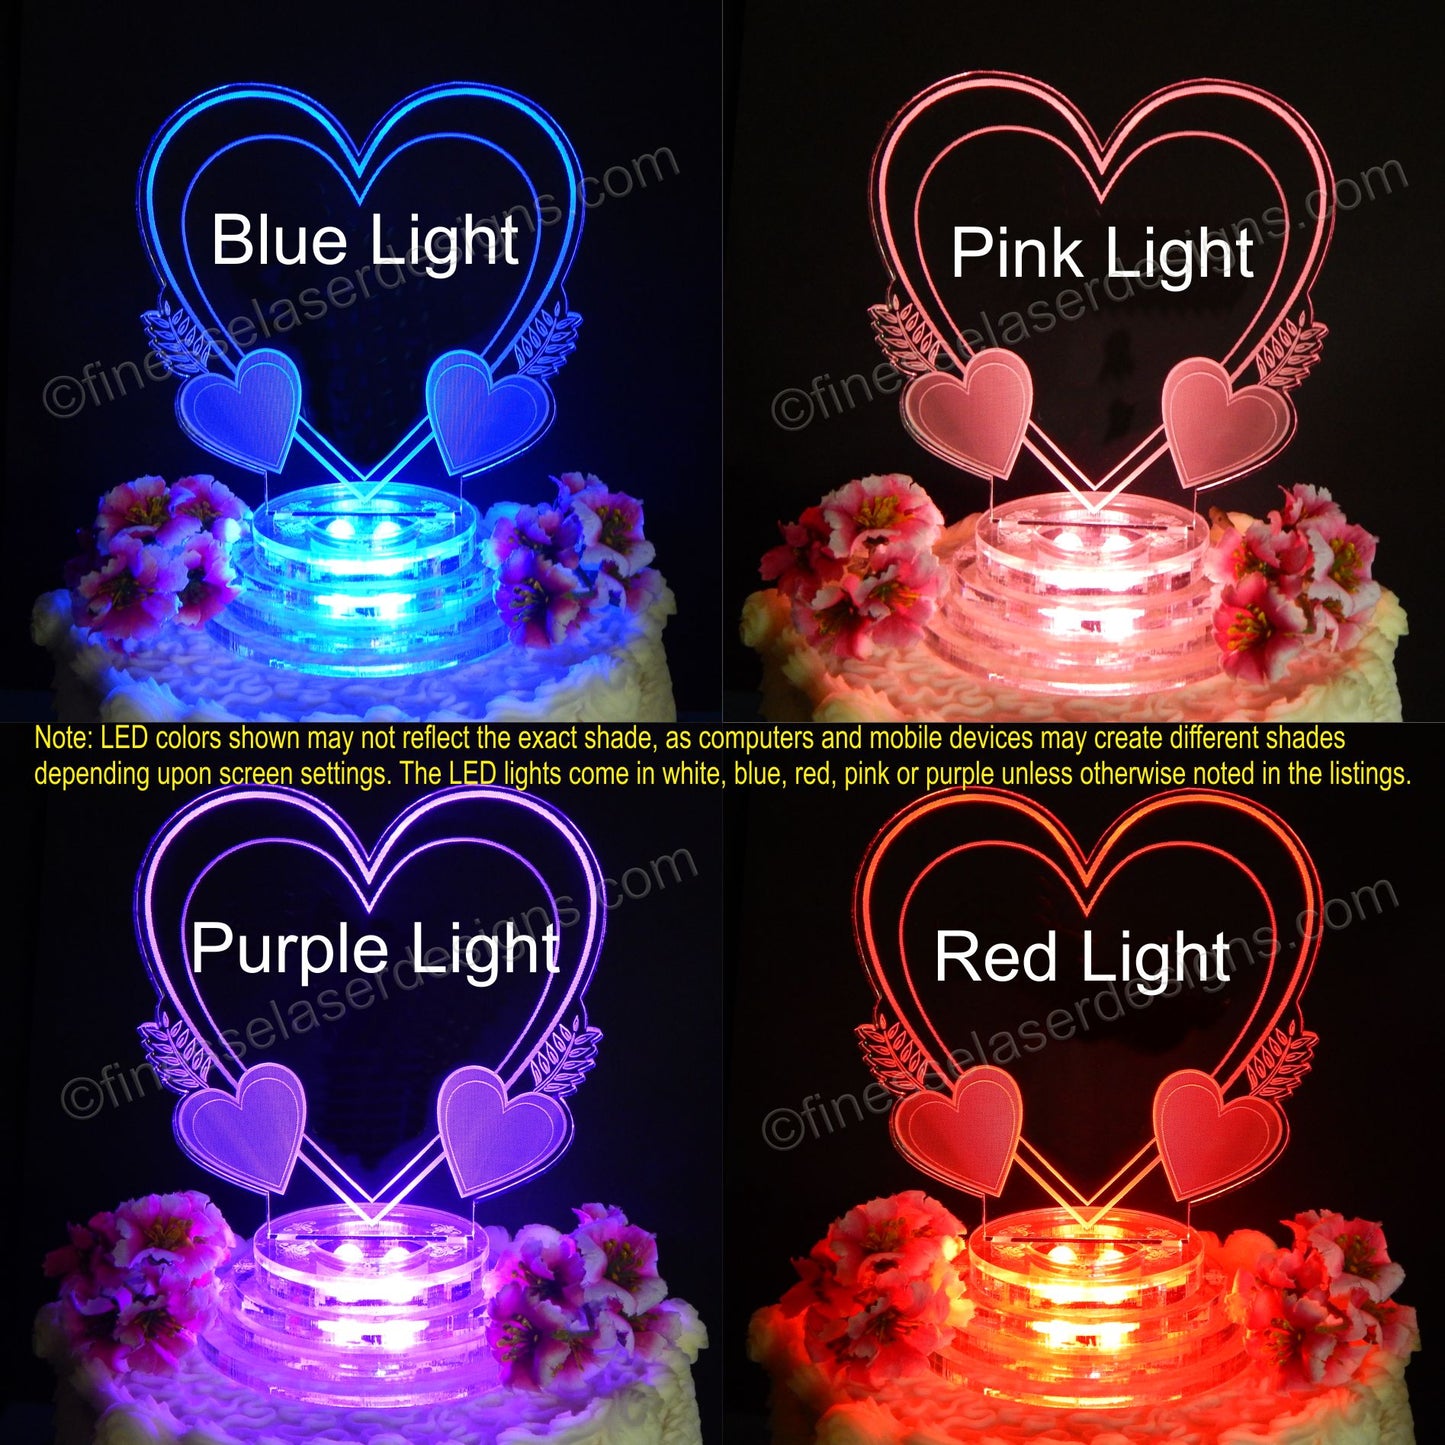 Colored views of acrylic heart shaped cake topper showing pink, purple, blue and red lighted views